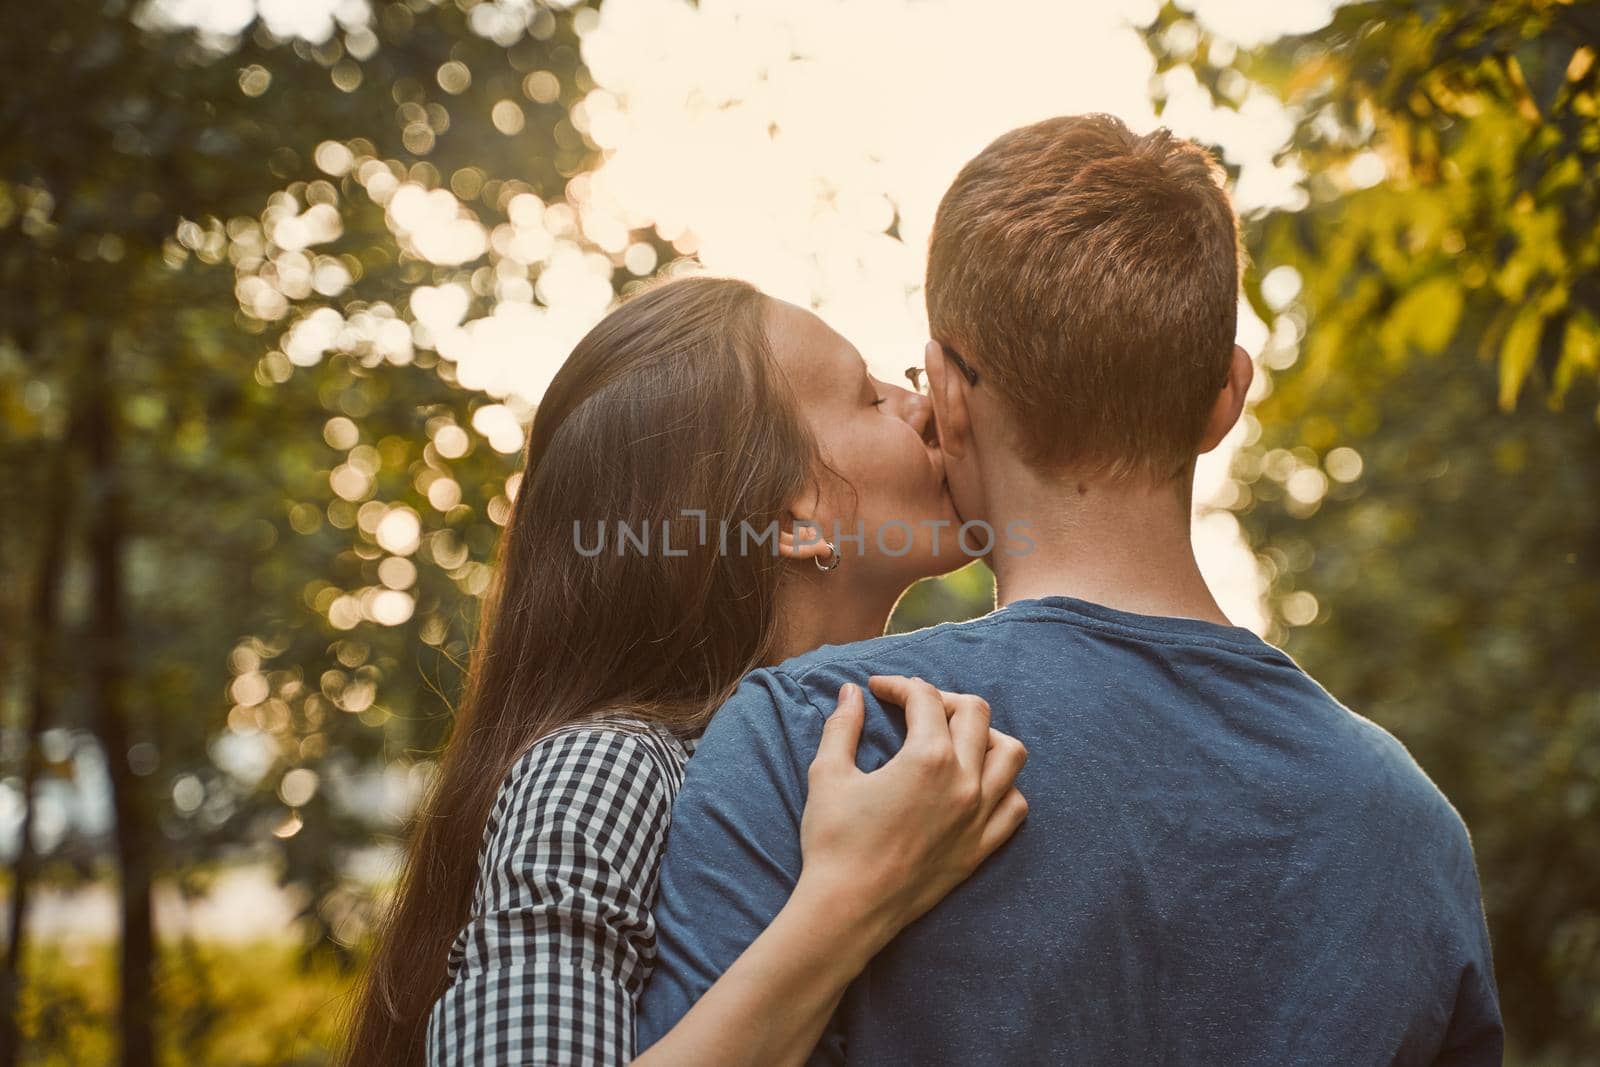 Girl kissing boy in cheek in the park, concept of teen love by NataBene